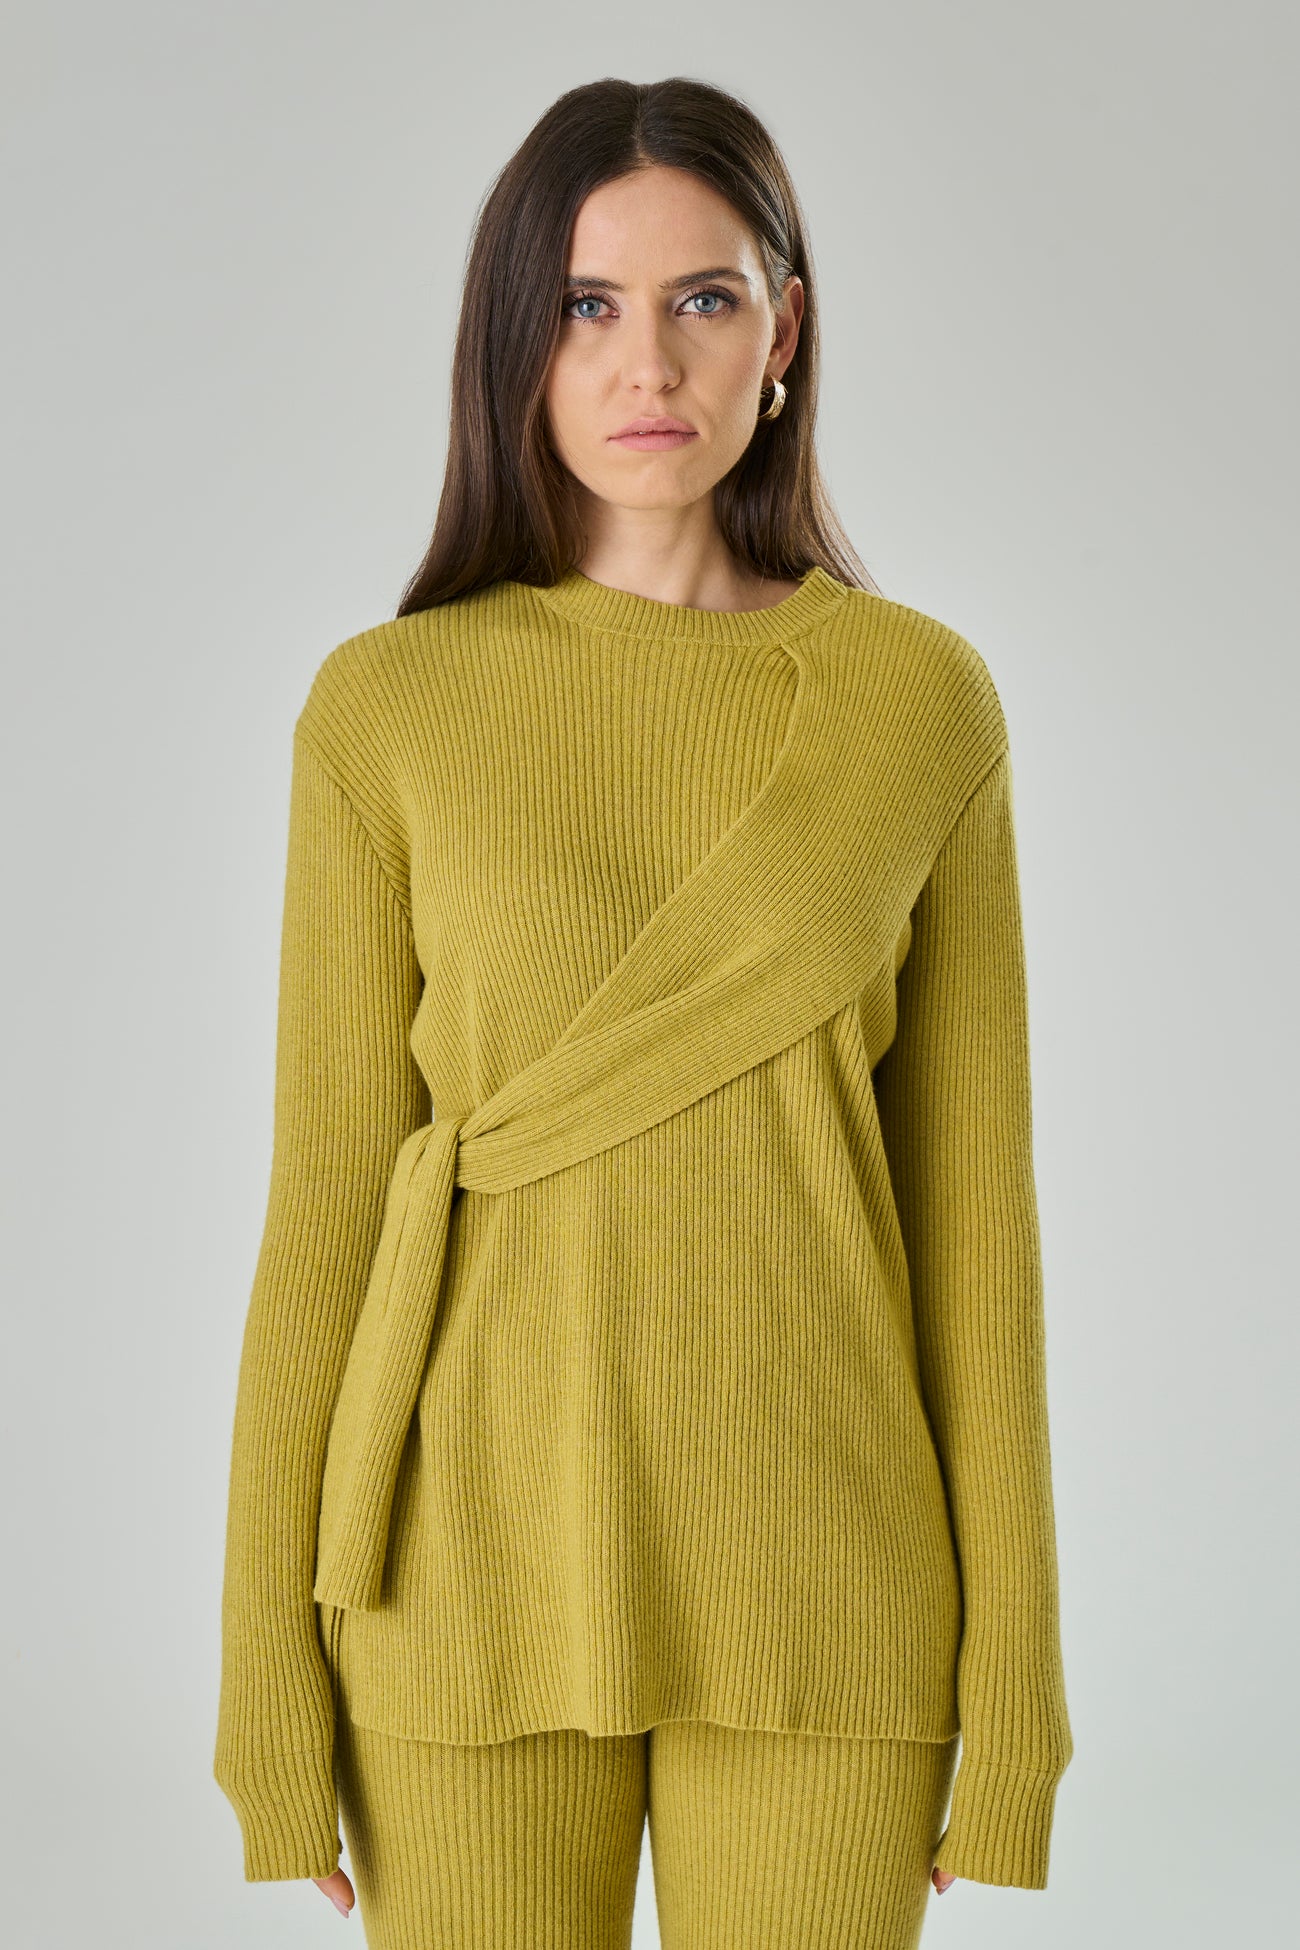 Cashmere blend crewneck with side bow - Antonia